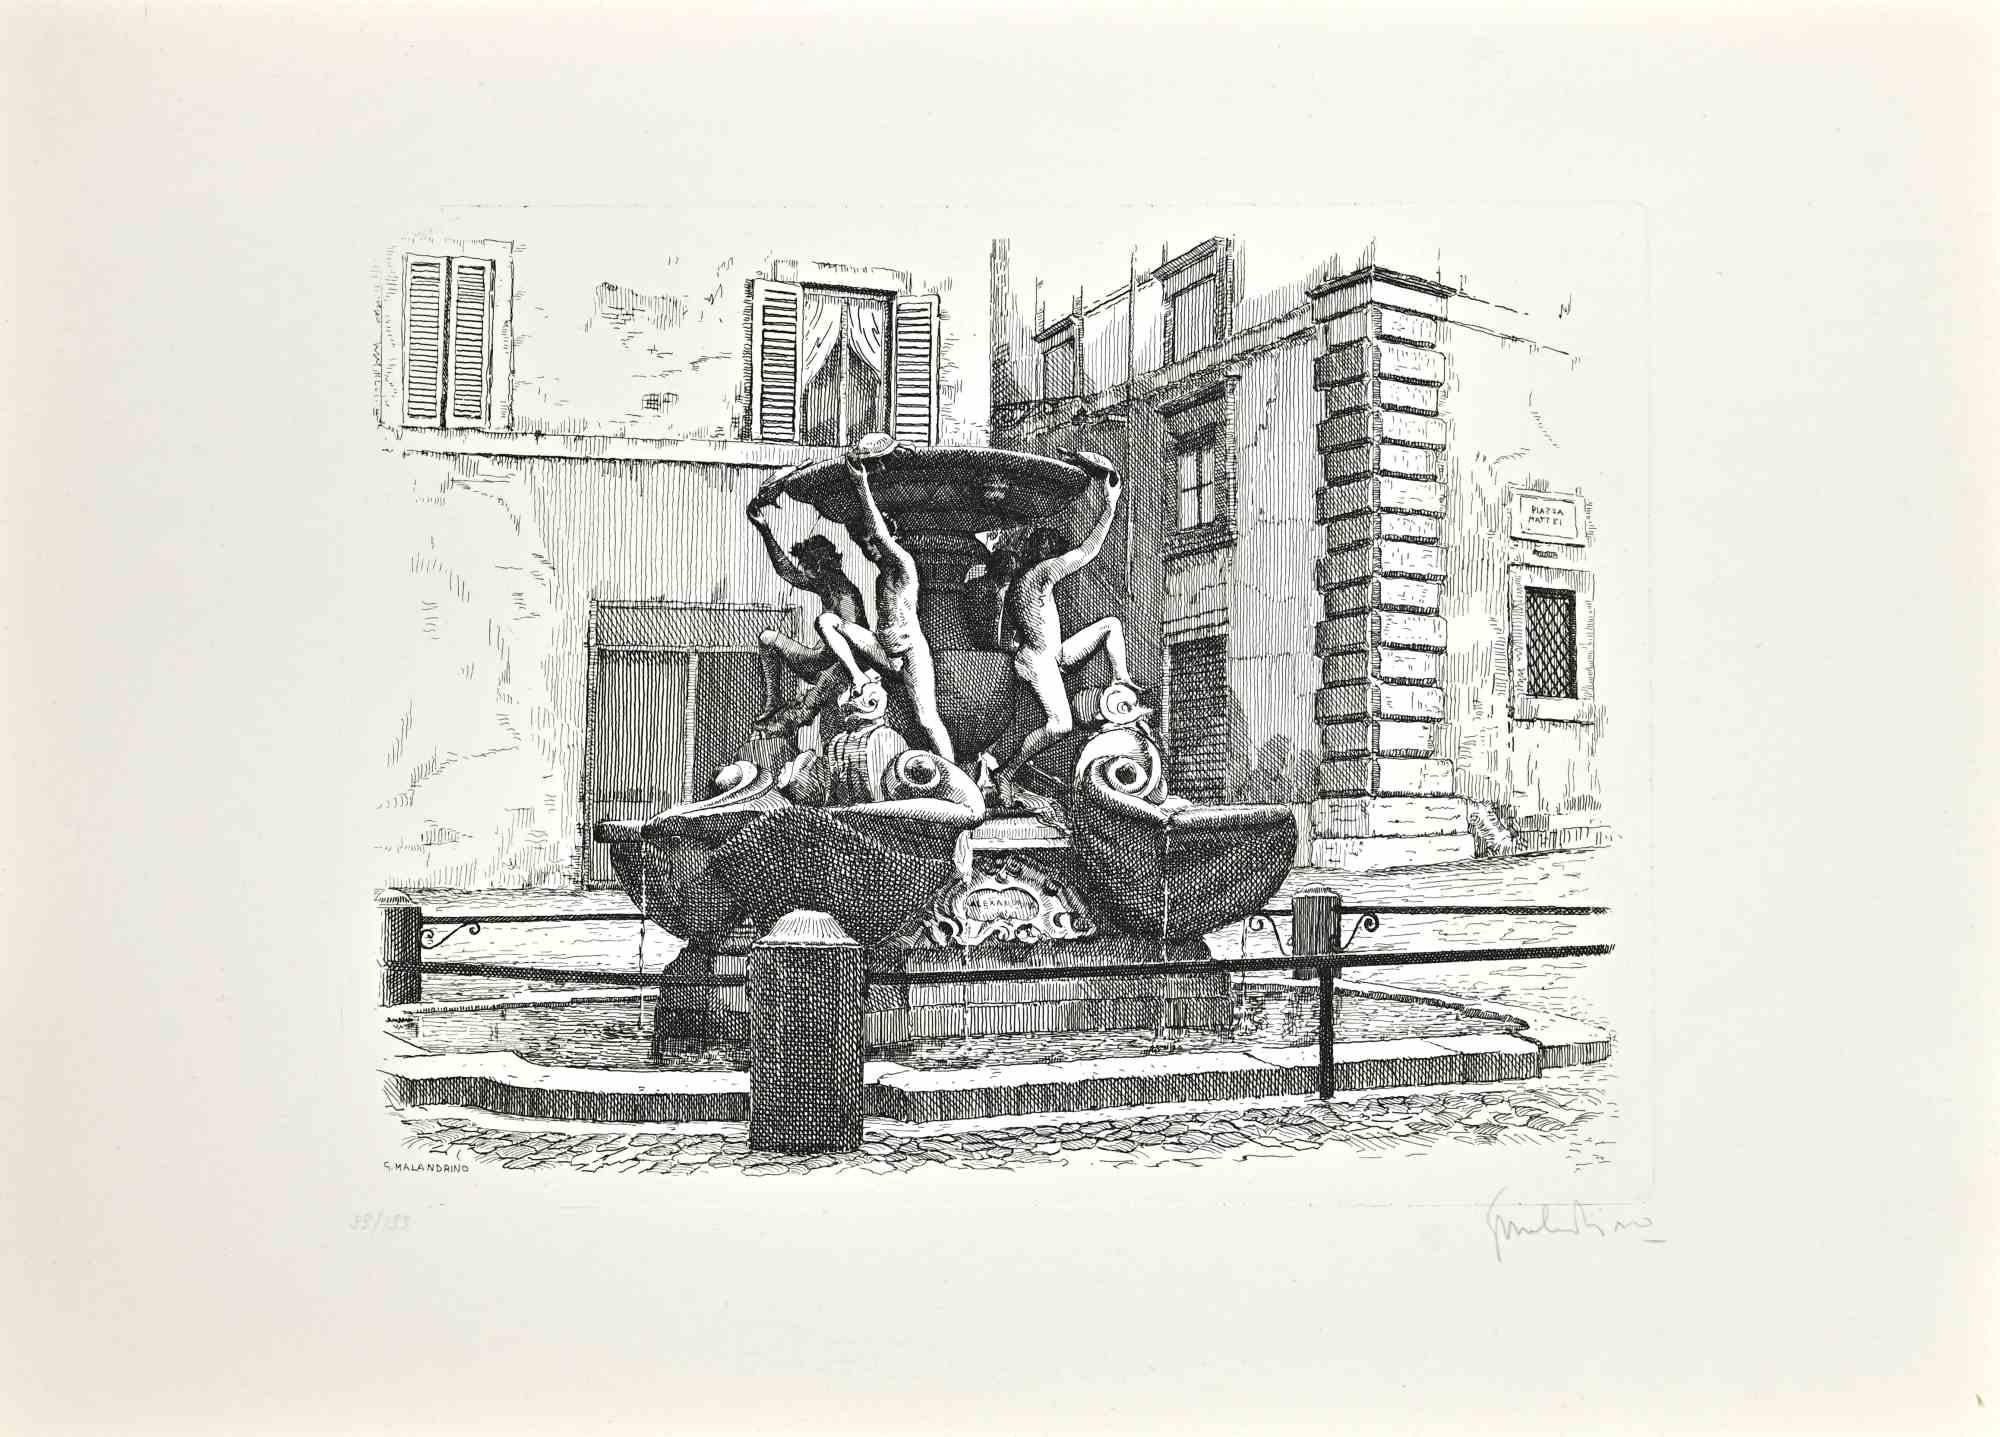 Fountain of the Turtles - Rome is an original artwork realized by Giuseppe Malandrino.

Original print in etching technique.

Hand-signed by the artist in pencil on the lower right corner.

Numbered edition of 199 copies.

Good conditions. 

This